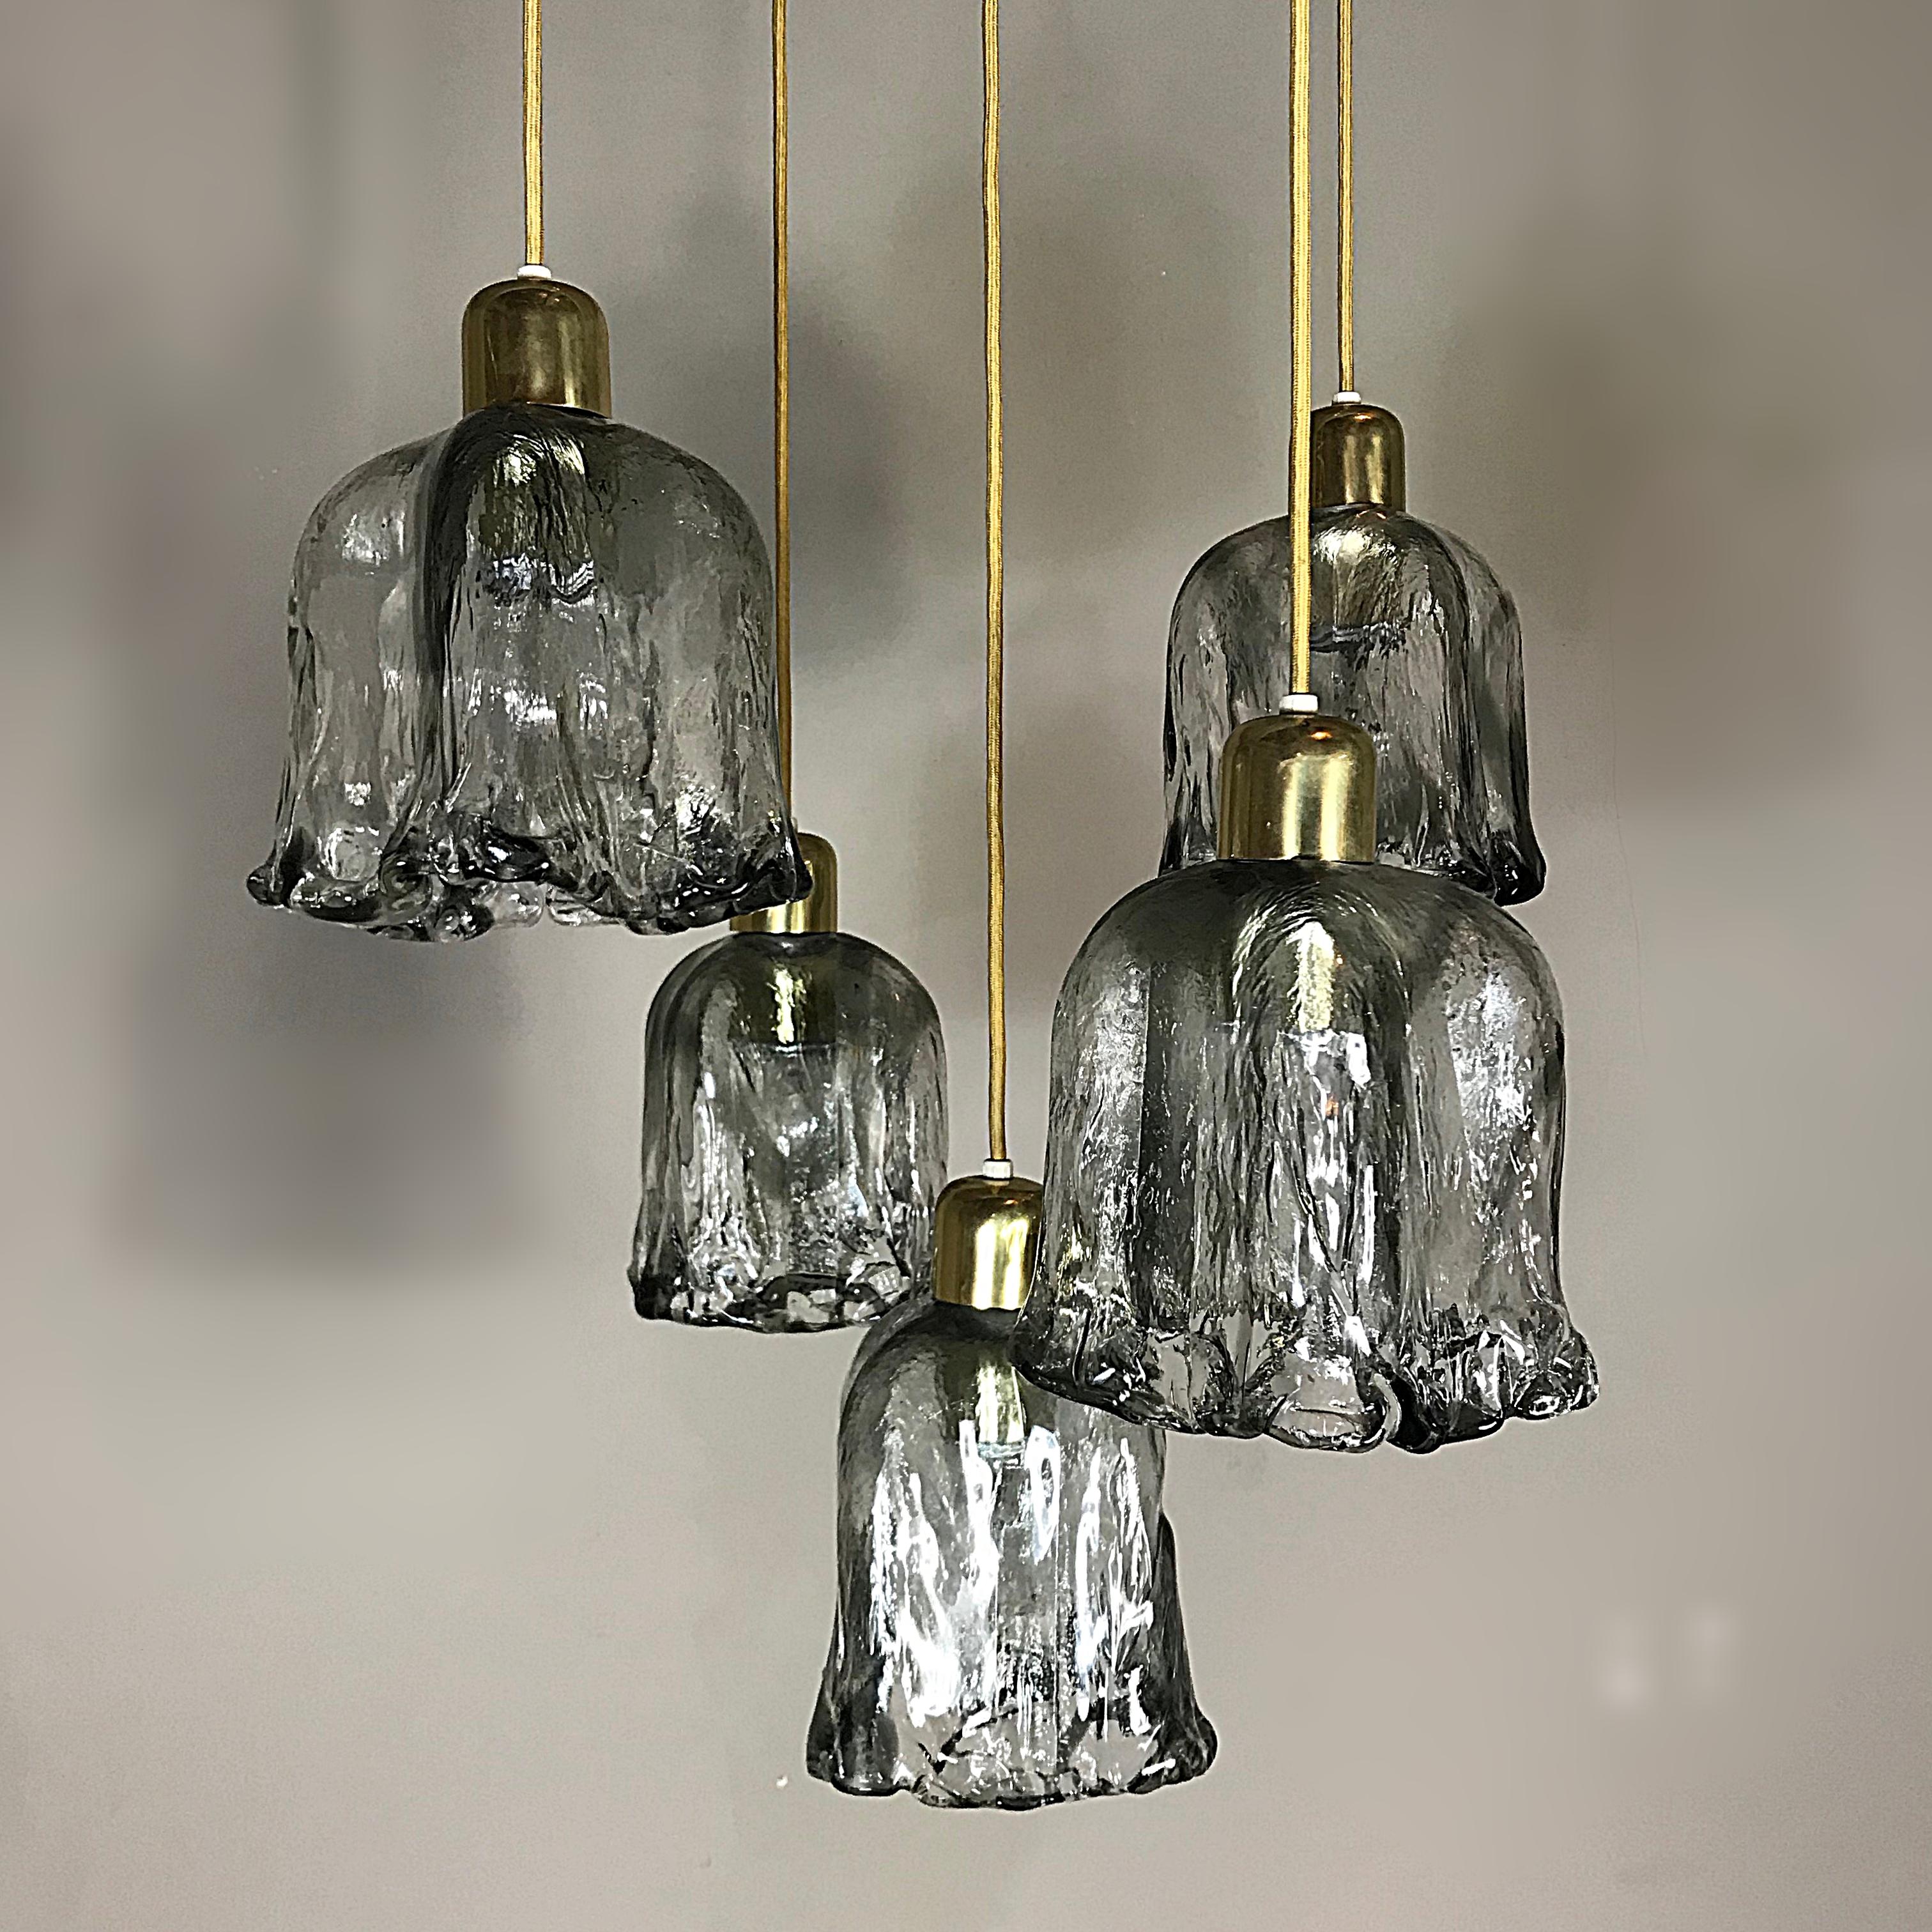 Beautiful high quality midcentury chandelier by J.T. Kalmar, made in Austria in 1960s. Five-tier textured handblown Murano glass in tulip form with brass spider. The cables can be adjusted per chandelier to alter the required height. Each glass